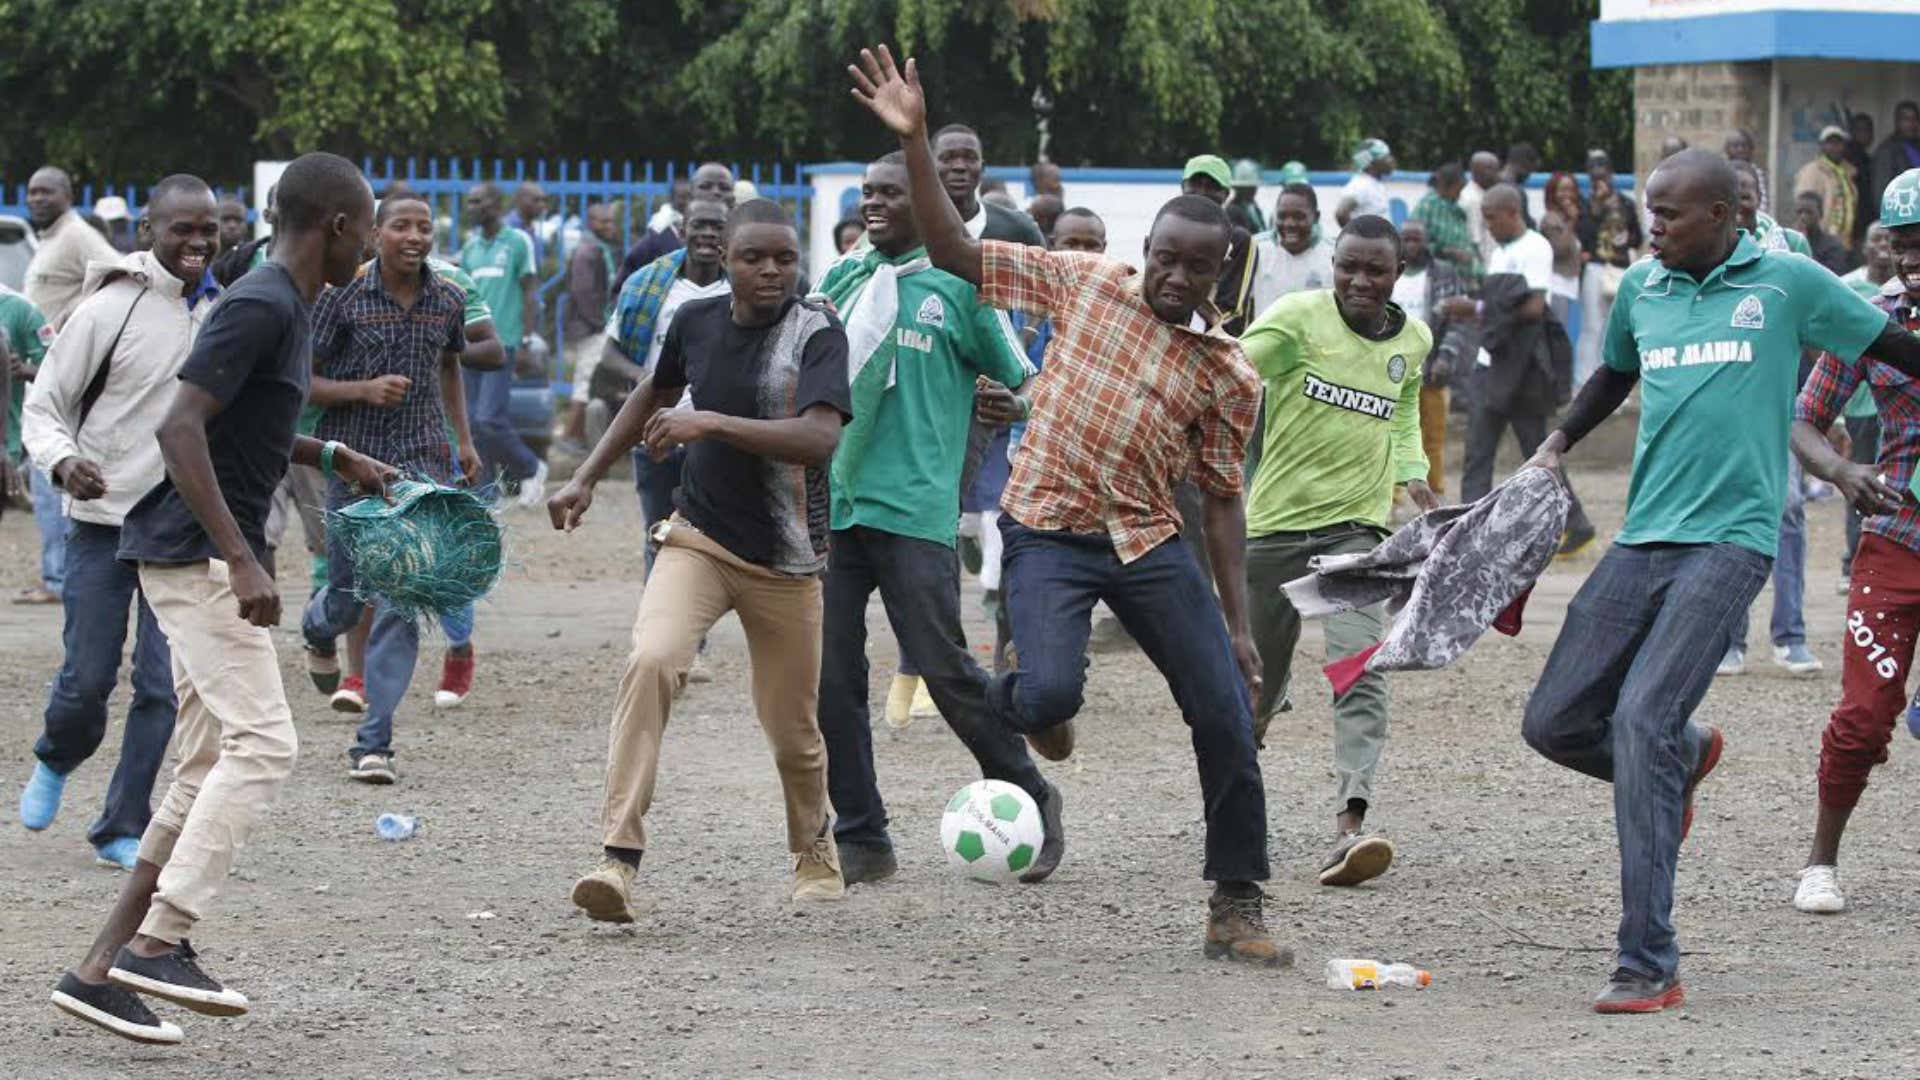 As AFC Leopards prepares to take on Gor Mahia on Sunday, Goal runs past matches in pictures.